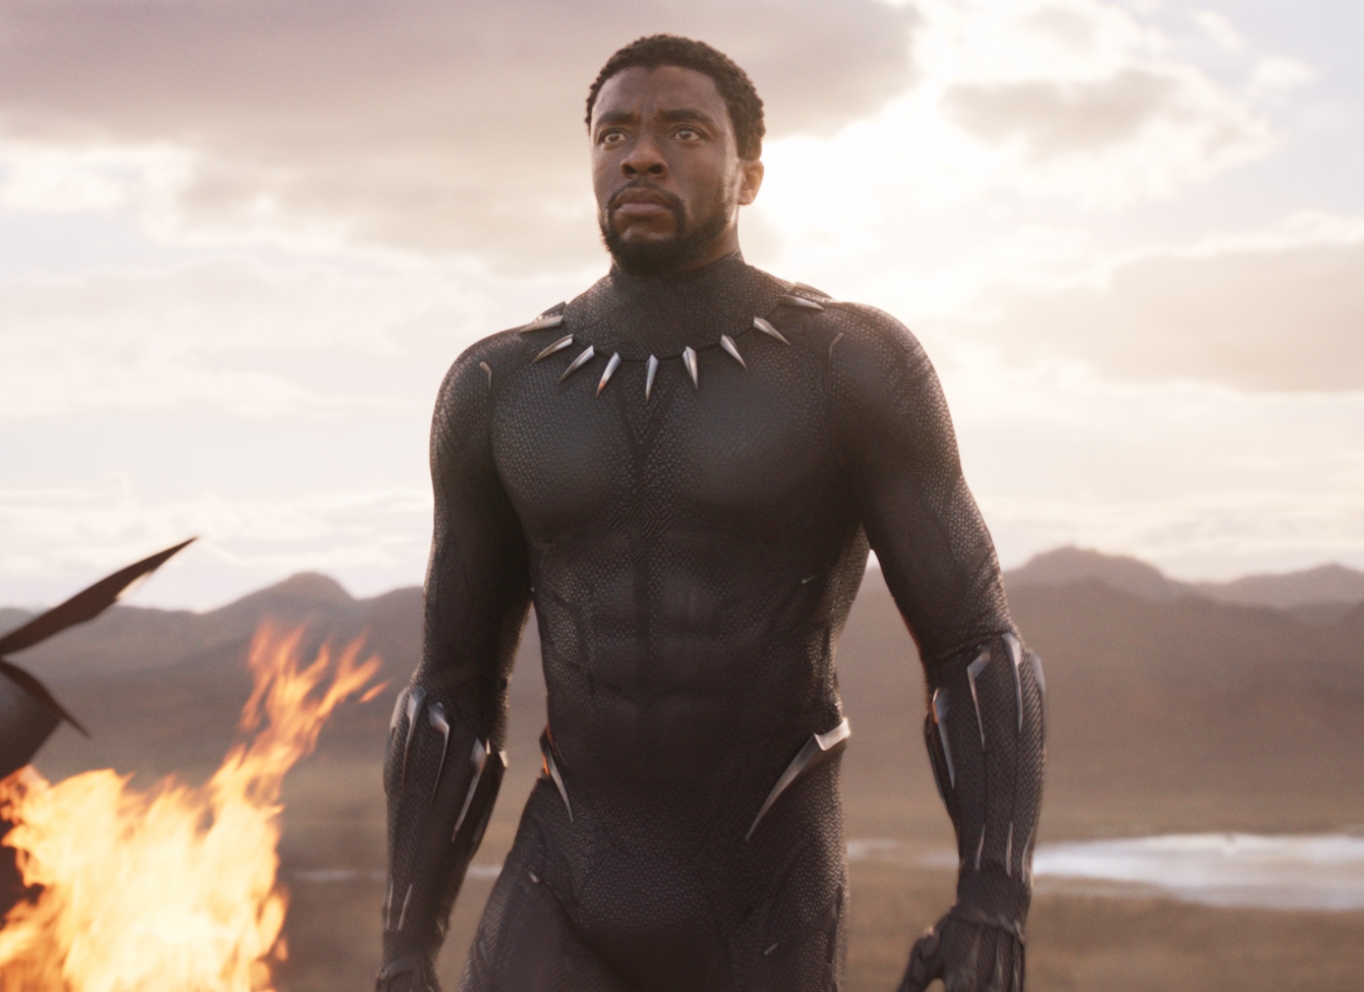 Black Panther the film